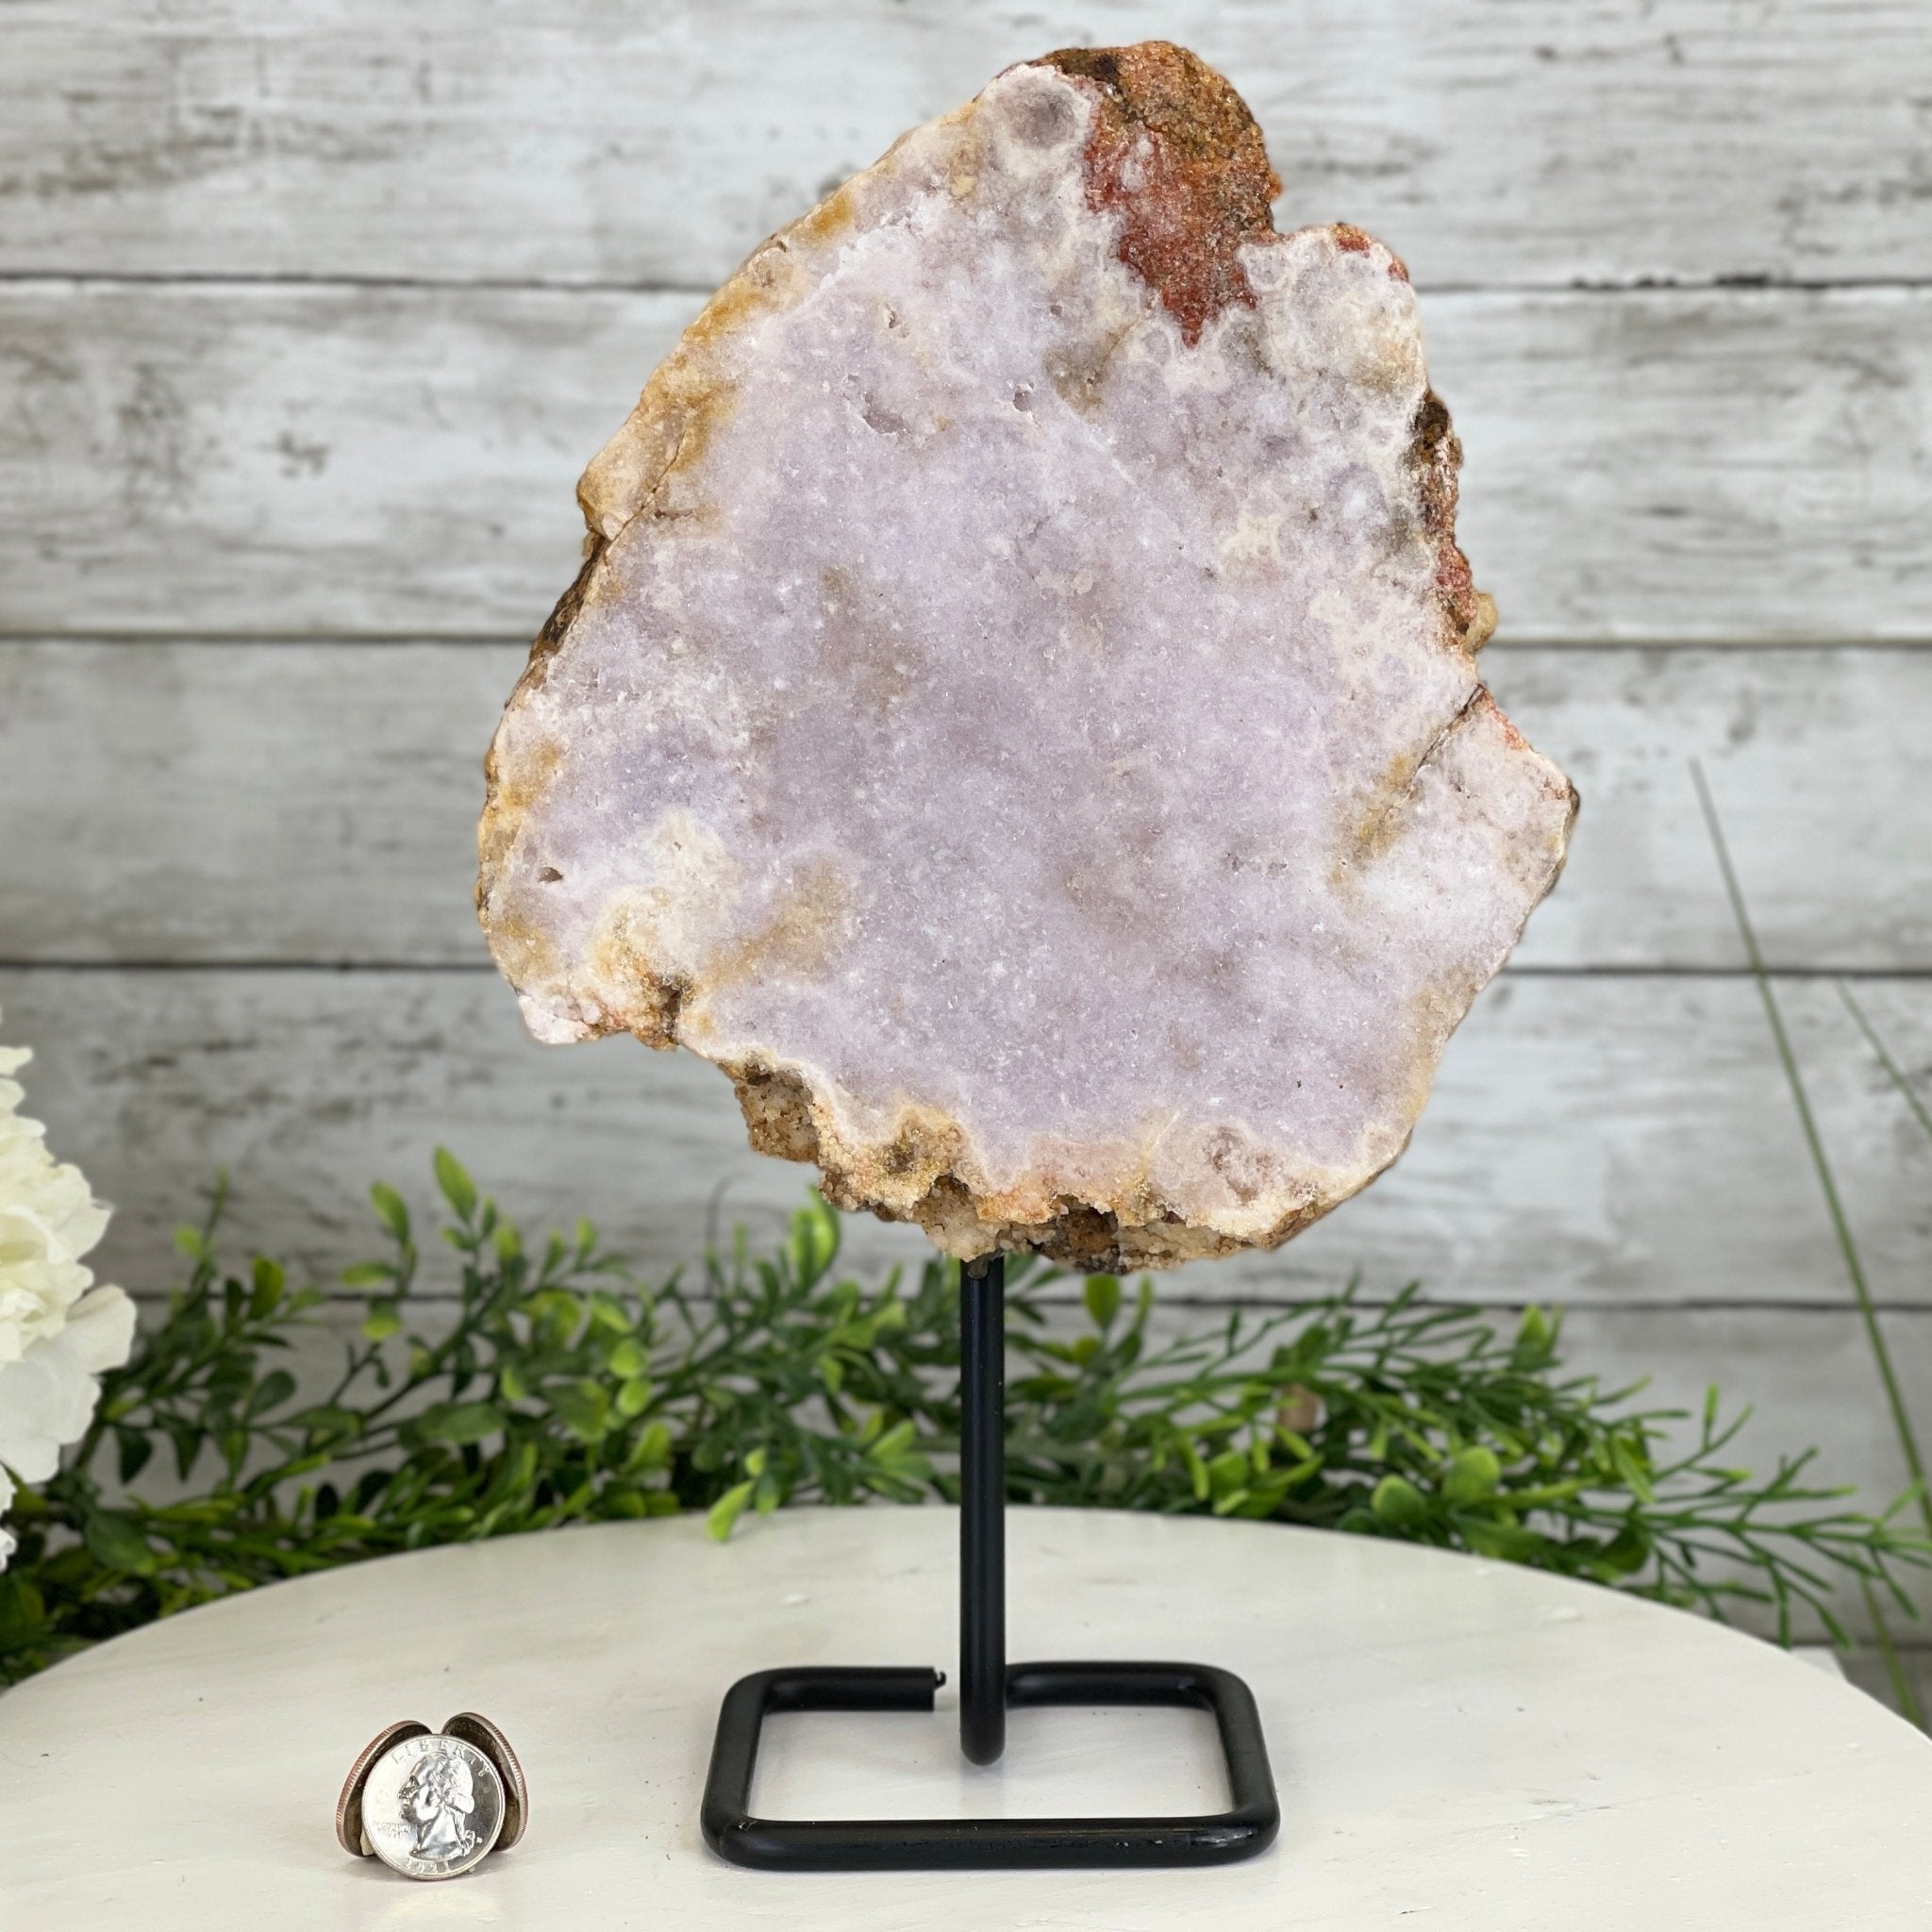 Pink Amethyst Slice on a Stand, 5.9 lbs and 12" Tall #5742-0037 by Brazil Gems - Brazil GemsBrazil GemsPink Amethyst Slice on a Stand, 5.9 lbs and 12" Tall #5742-0037 by Brazil GemsSlices on Fixed Bases5742-0037